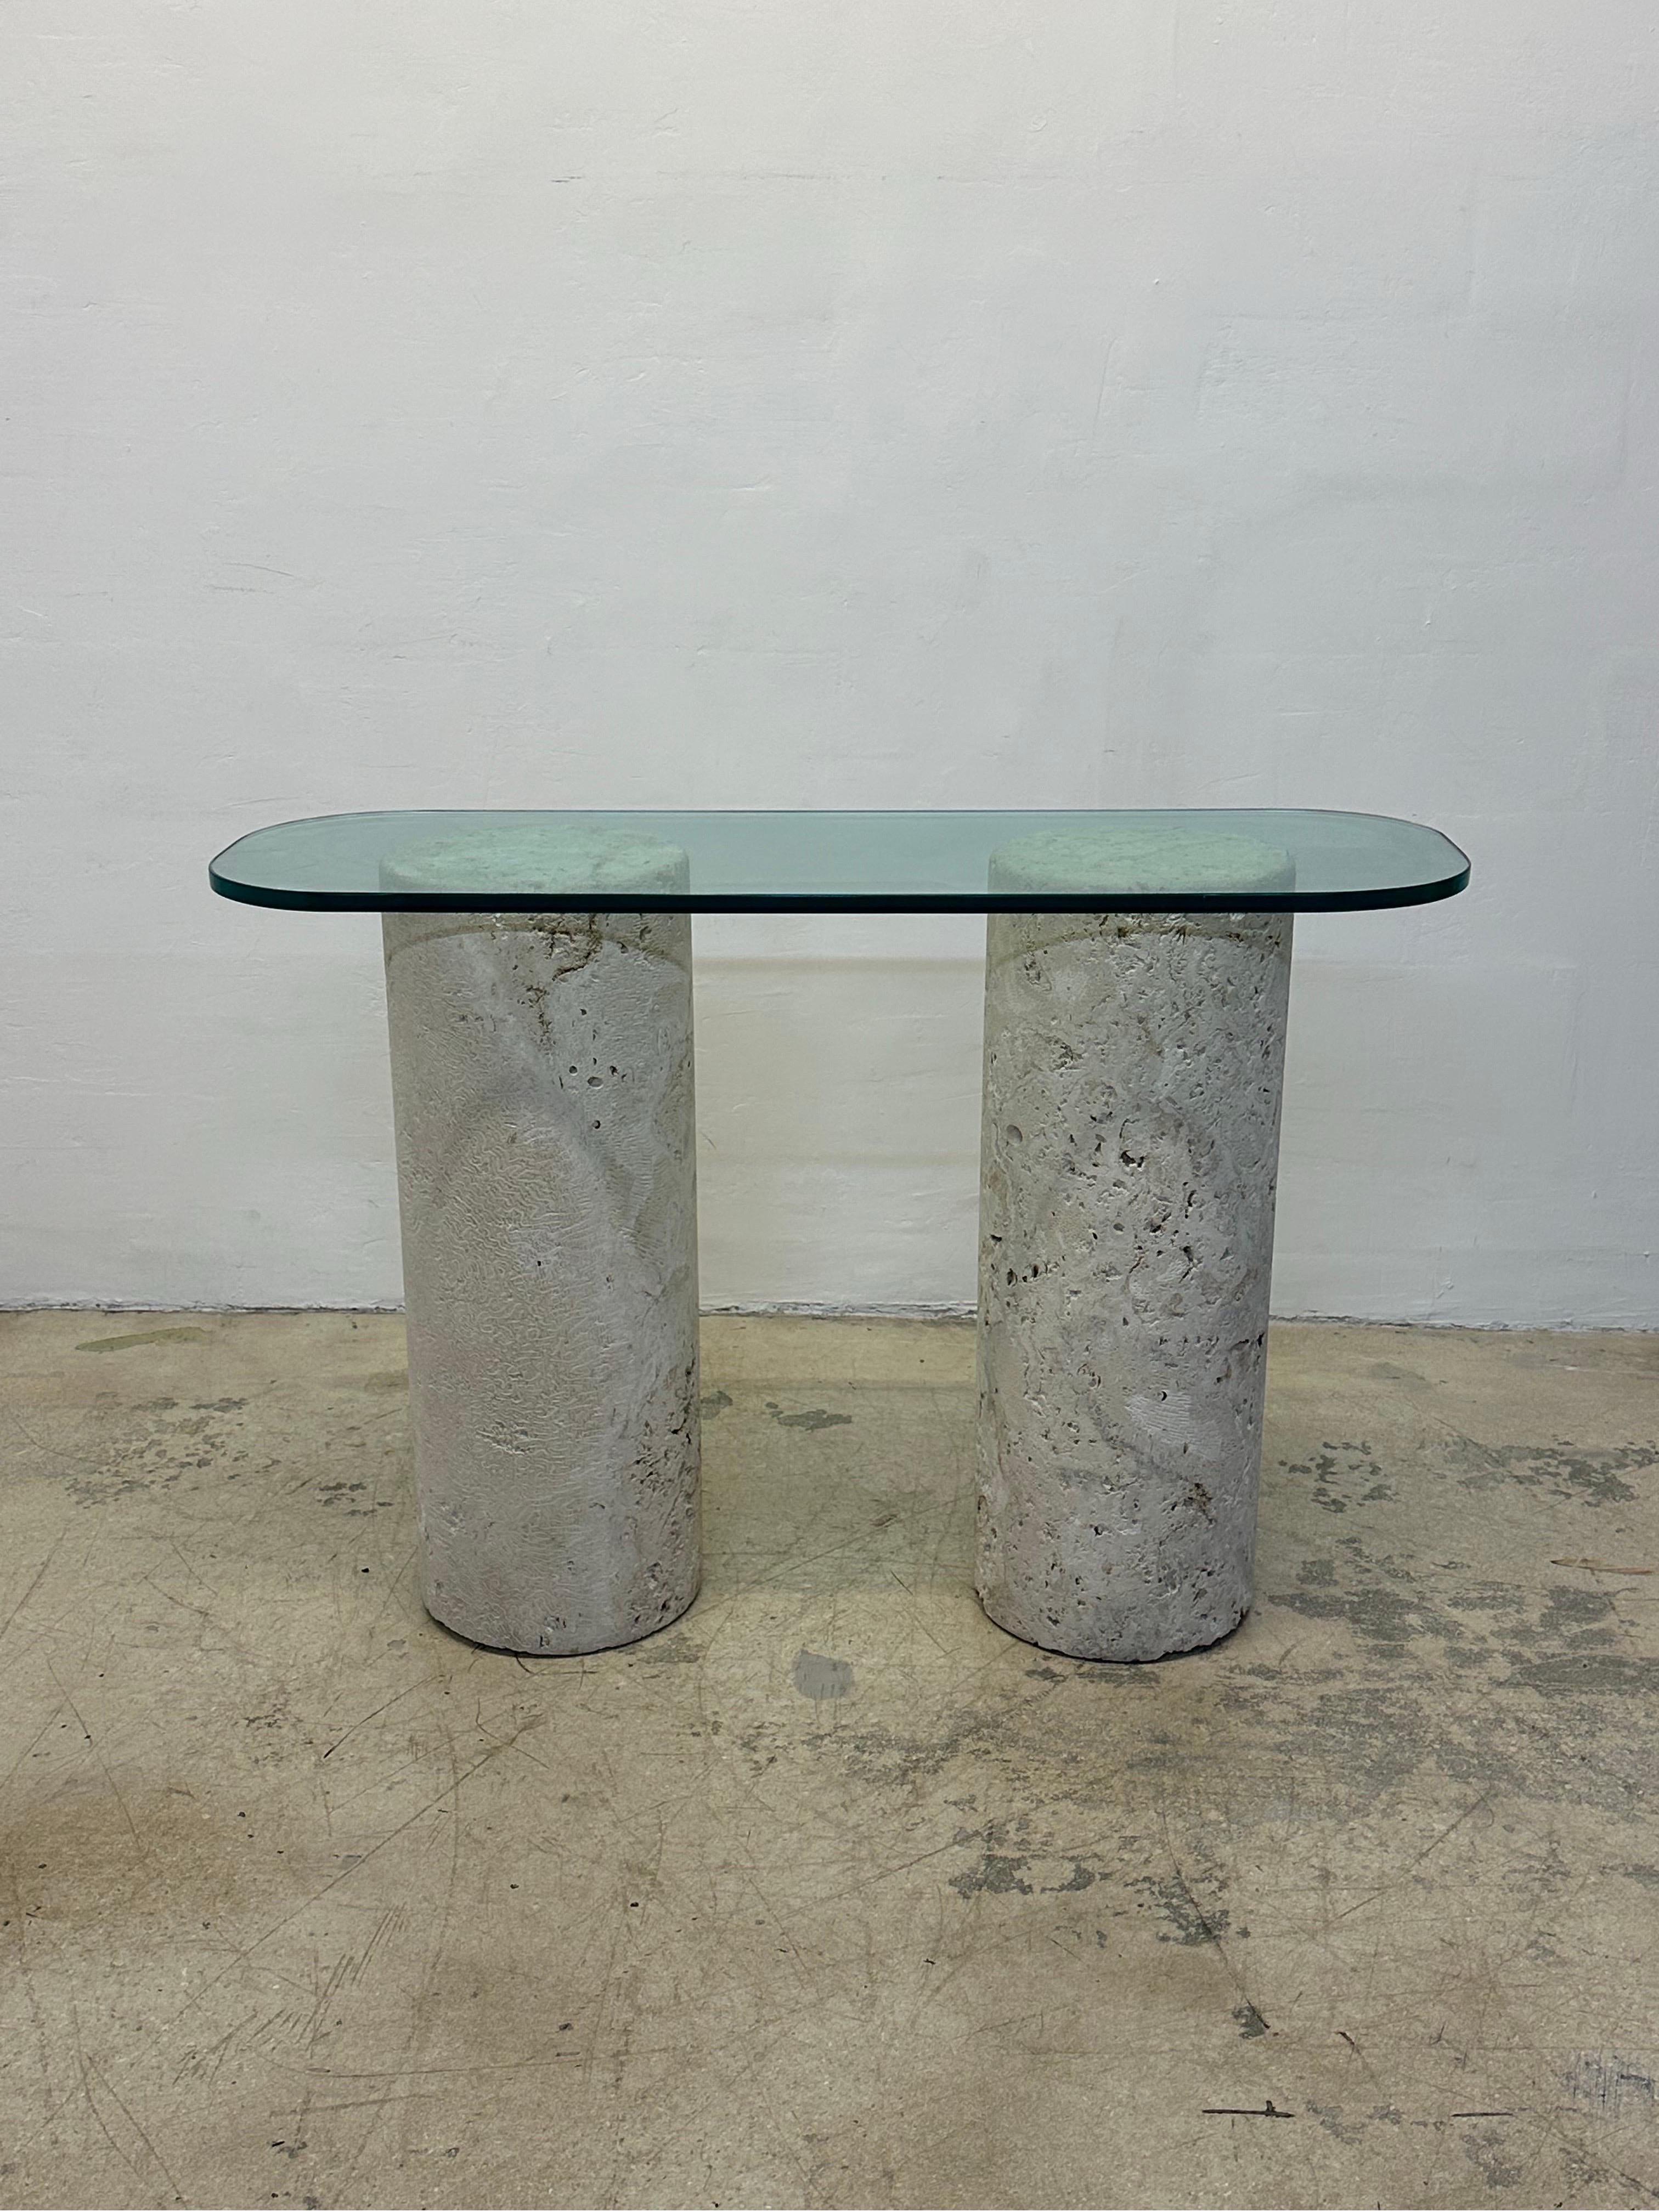 Coquina coral stone pillar console table with 3/4” polished edge glass top.  

Also available without glass top. Please see separate listing here:

1stDibs Ref: LU5392238957212